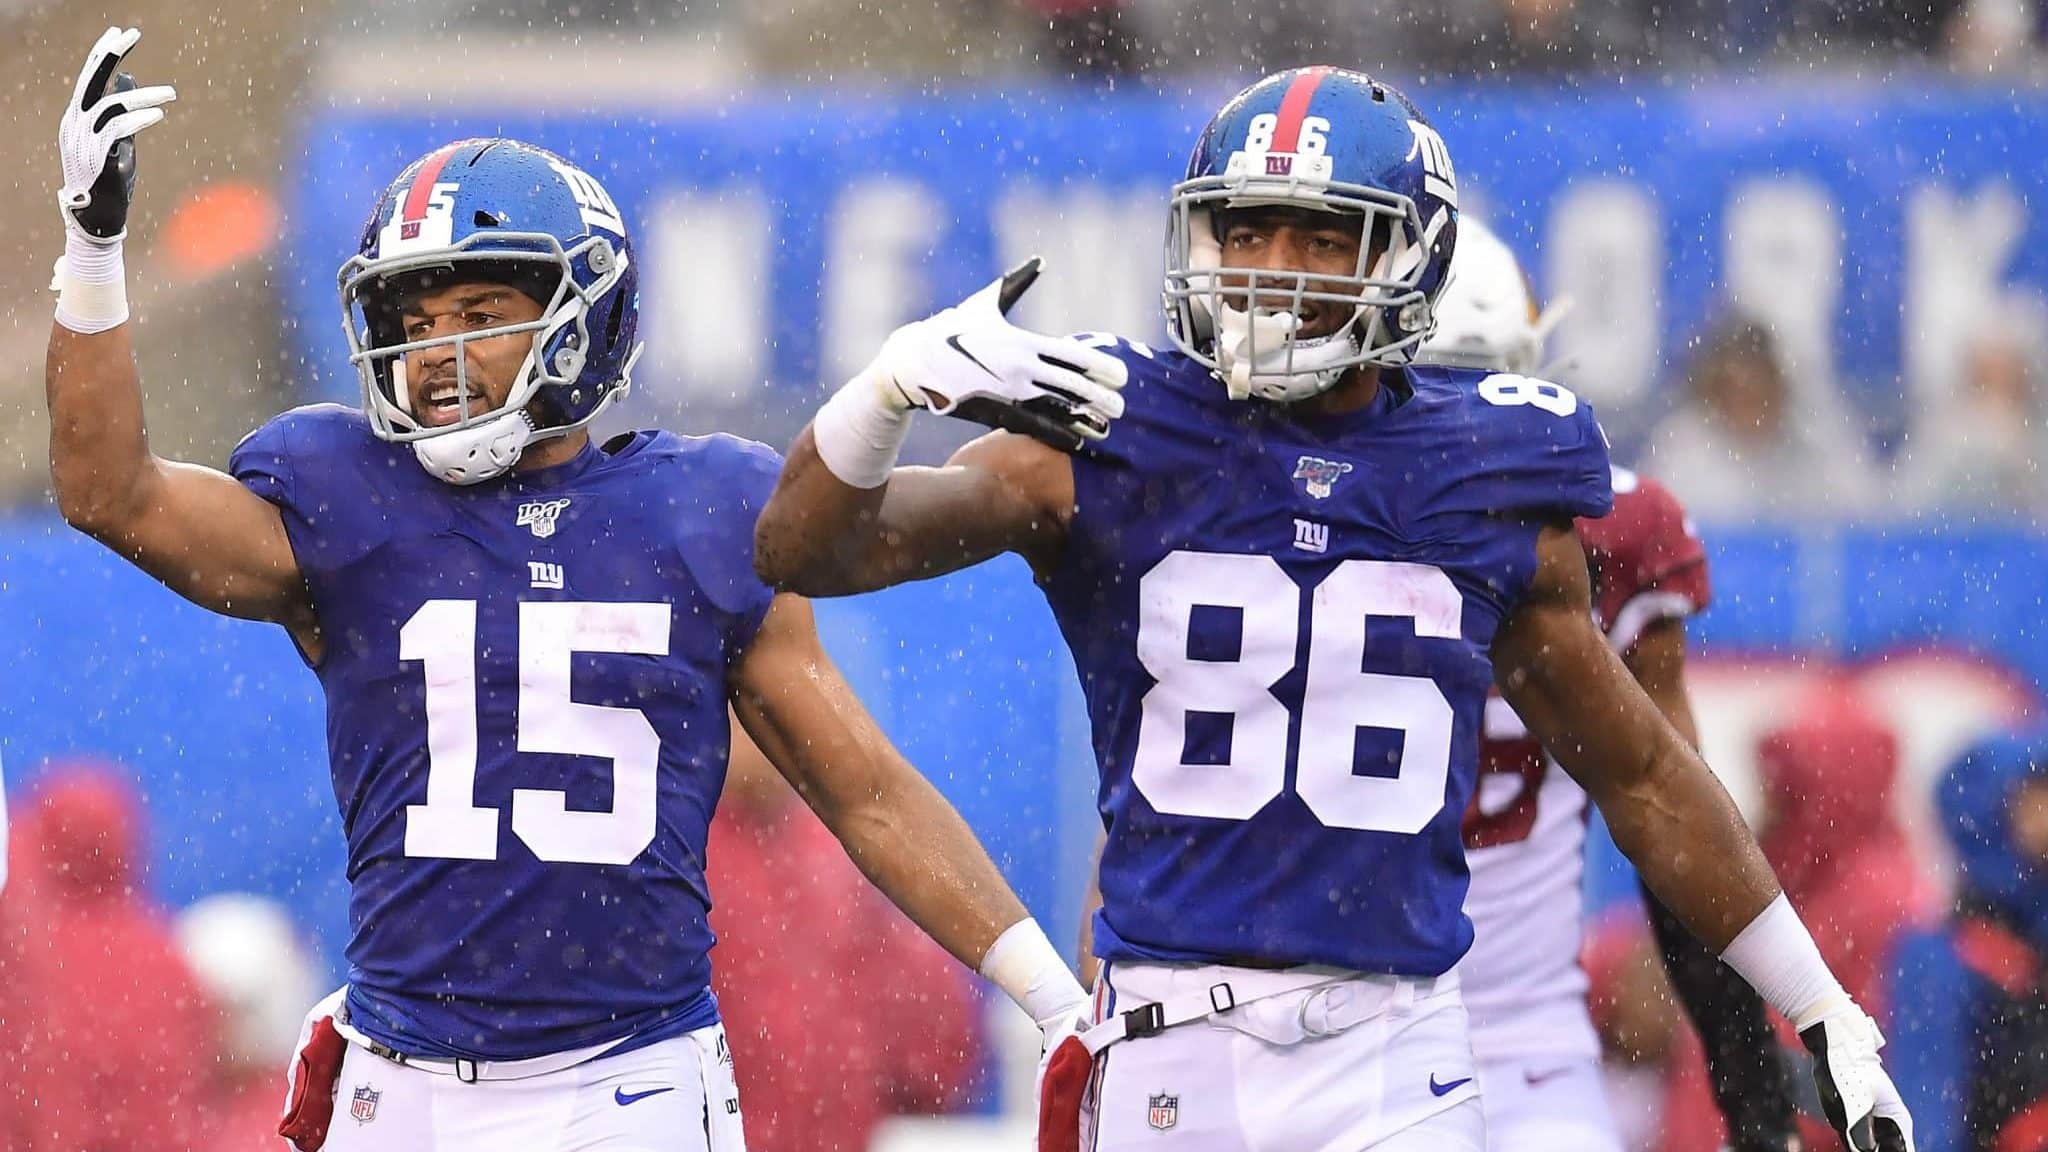 EAST RUTHERFORD, NEW JERSEY - OCTOBER 20: Golden Tate #15 and Darius Slayton #86 of the New York Giants react during the second half of their game against the Arizona Cardinals at MetLife Stadium on October 20, 2019 in East Rutherford, New Jersey.